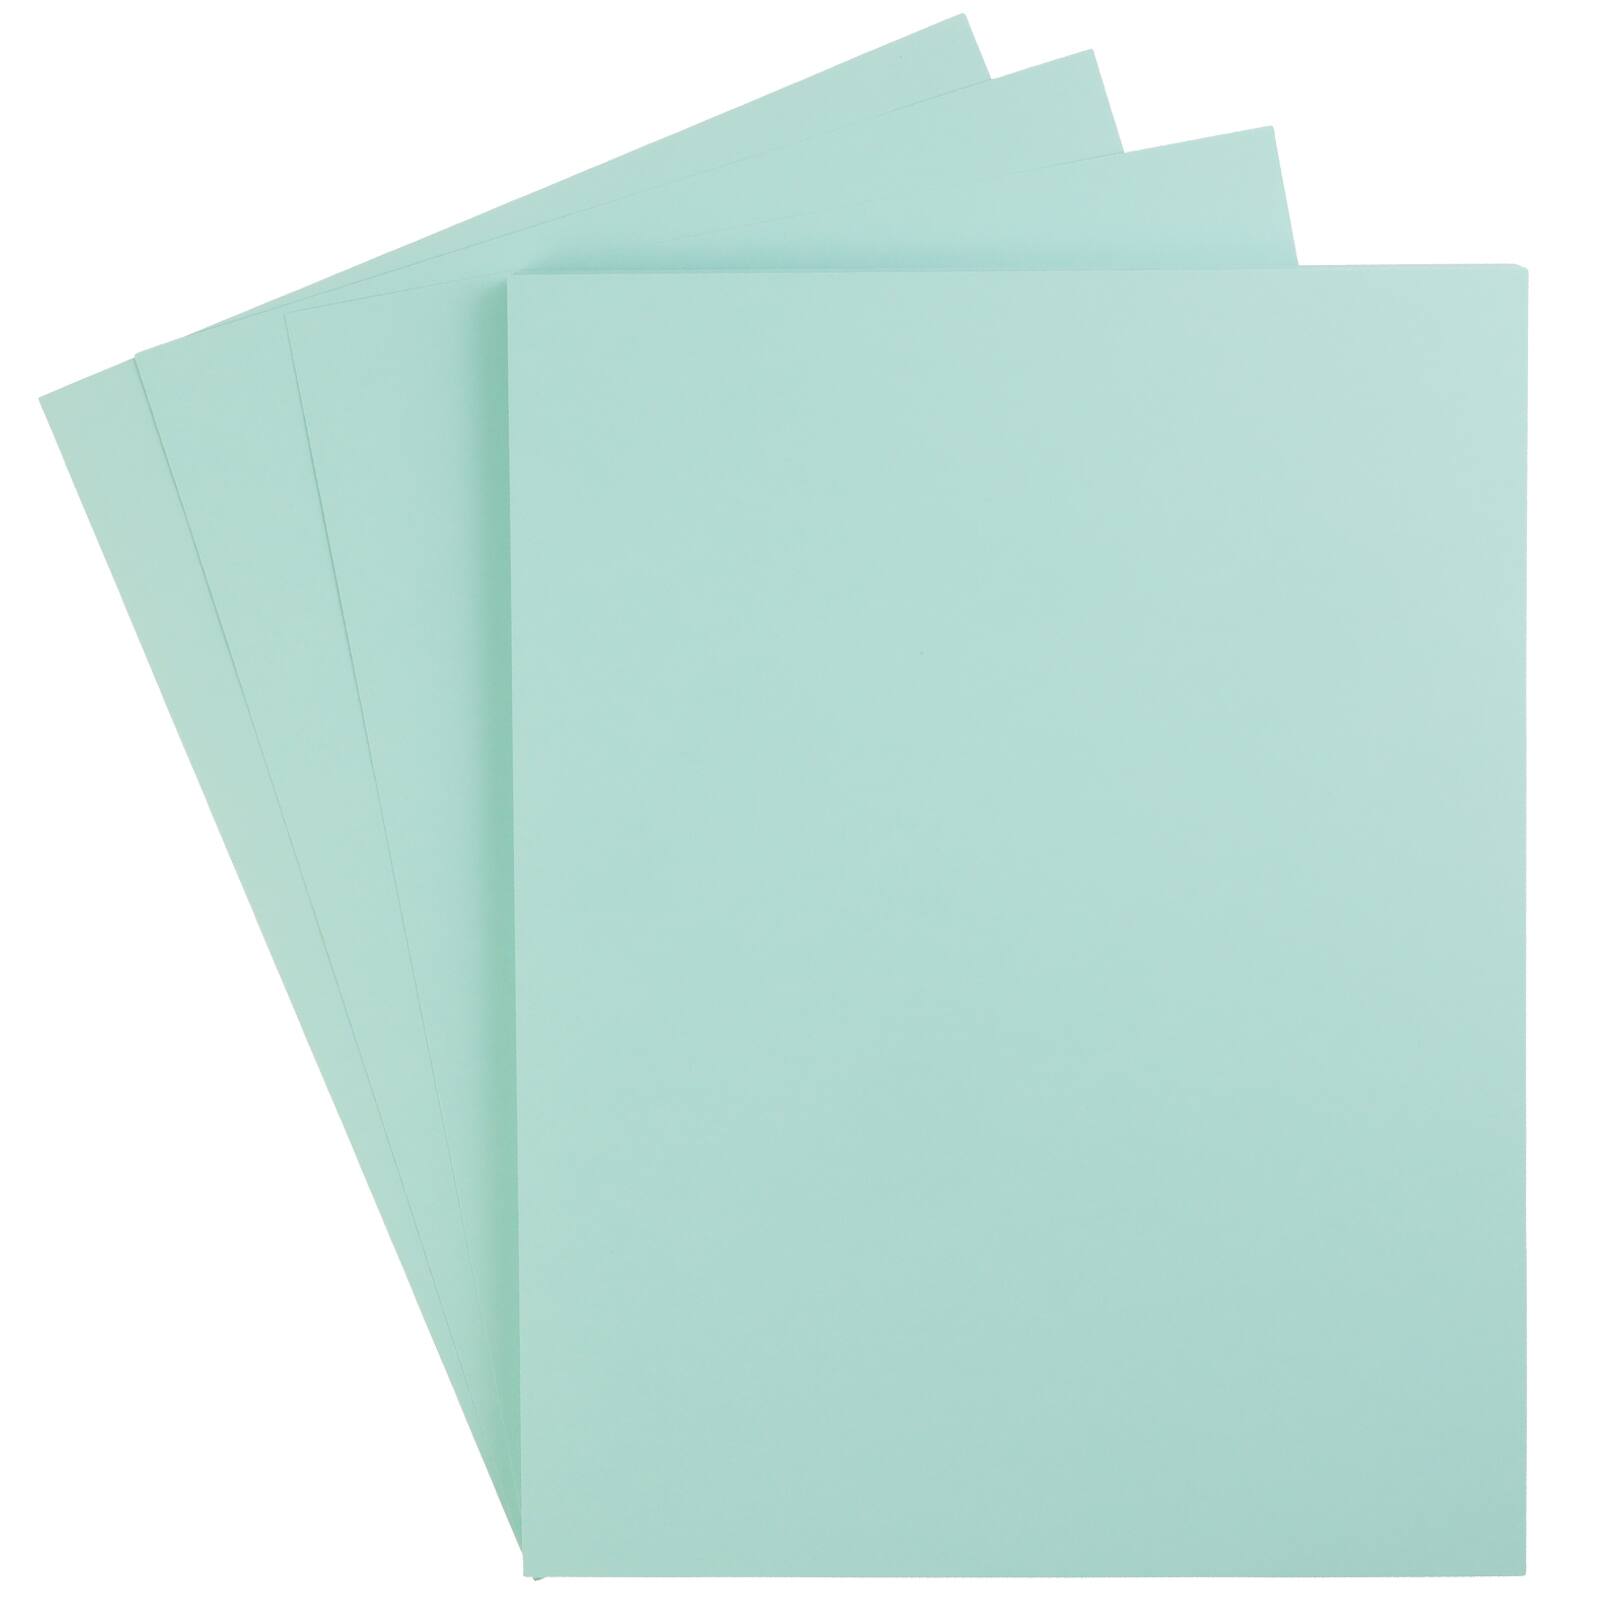 8.5 x 11 Cardstock Paper by Recollections 50 Sheets in Summer Daze | Michaels